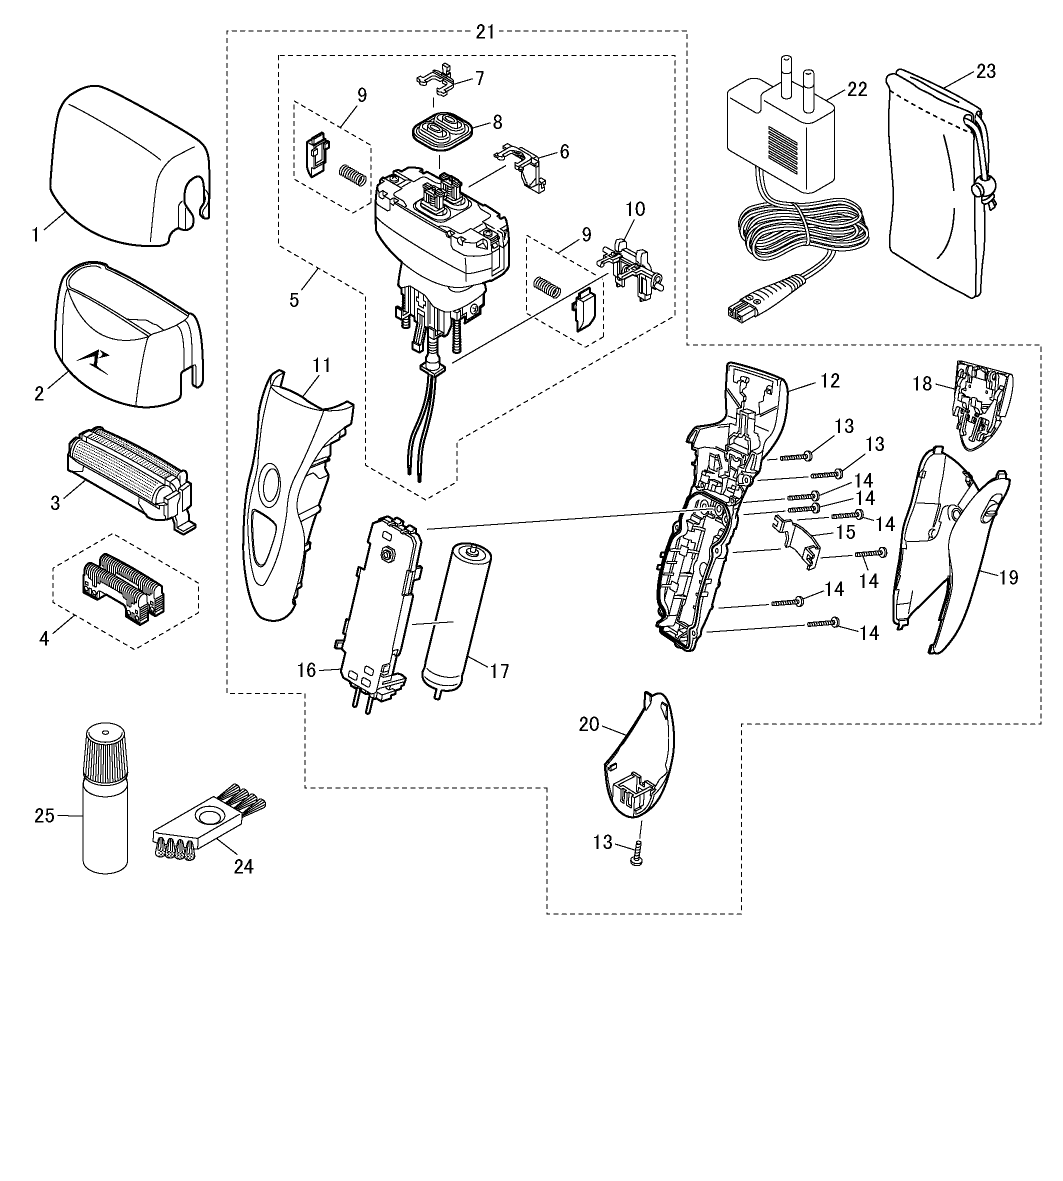 ES-8103: Exploded View